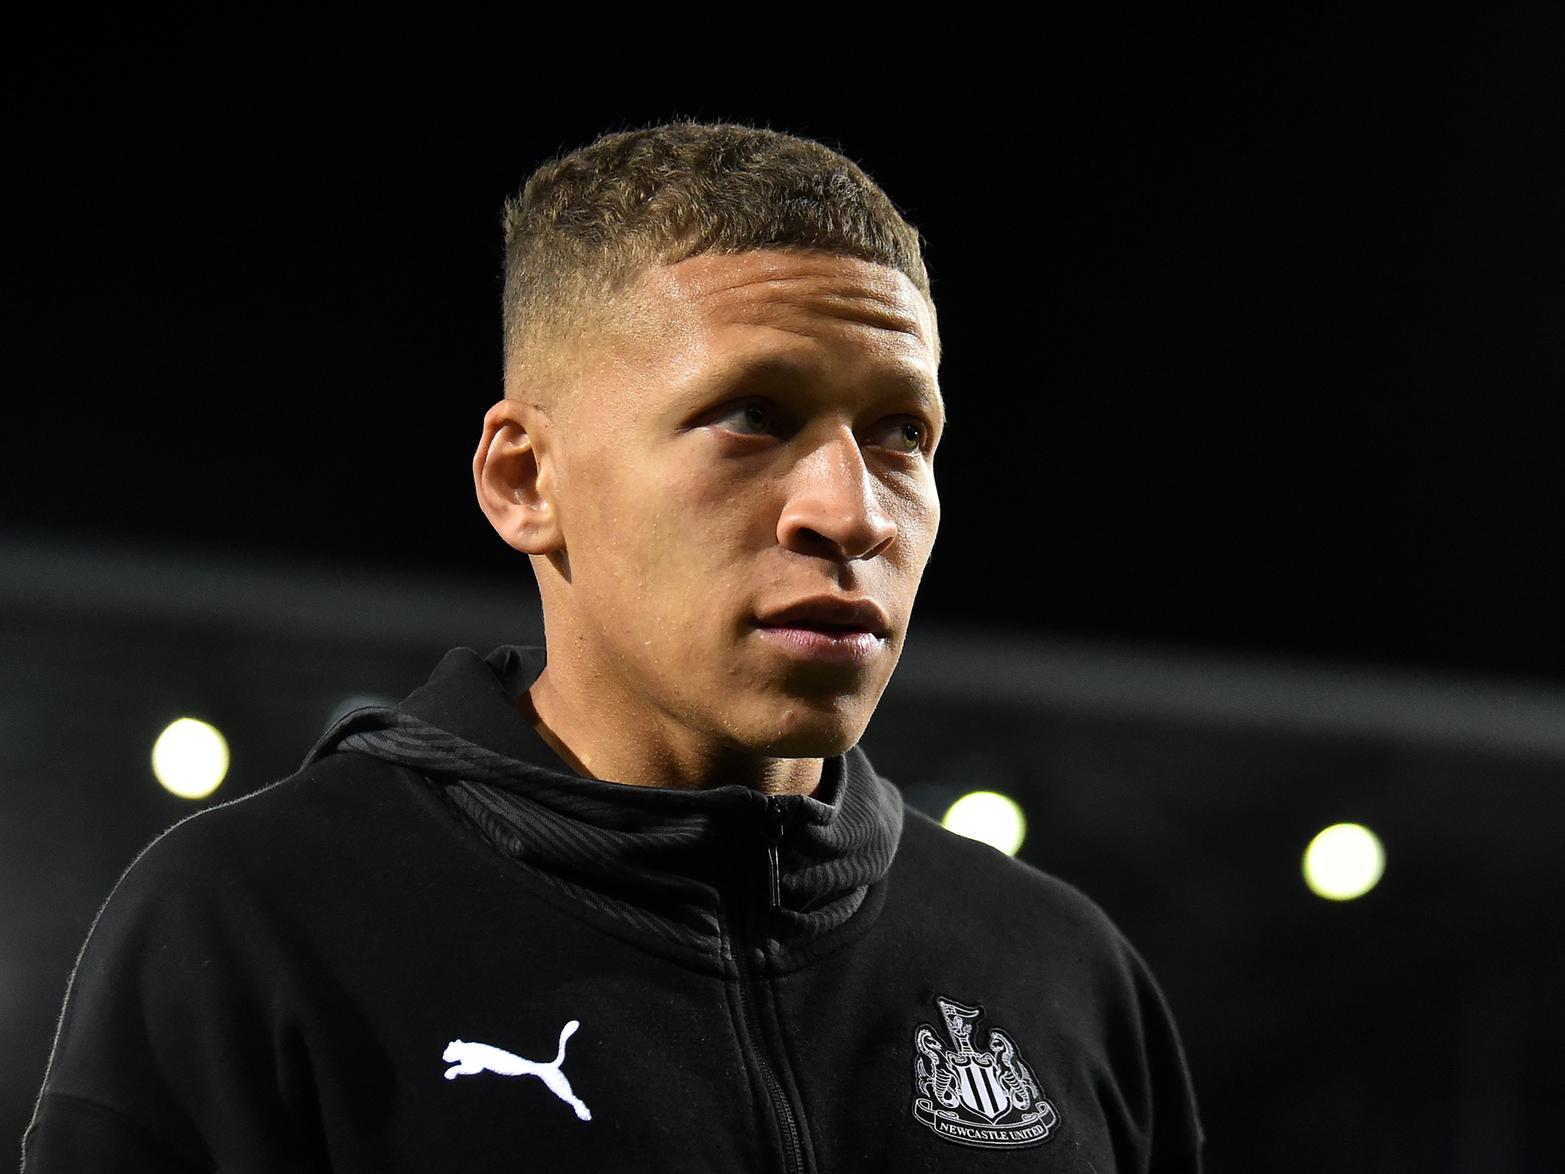 West Brom boss Slaven Bilic has revealed that he attempted to sign Newcastle United striker Dwight Gayle last summer. The player starred for the Baggies on loan last season, scoring 24 goals. (Express & Star)